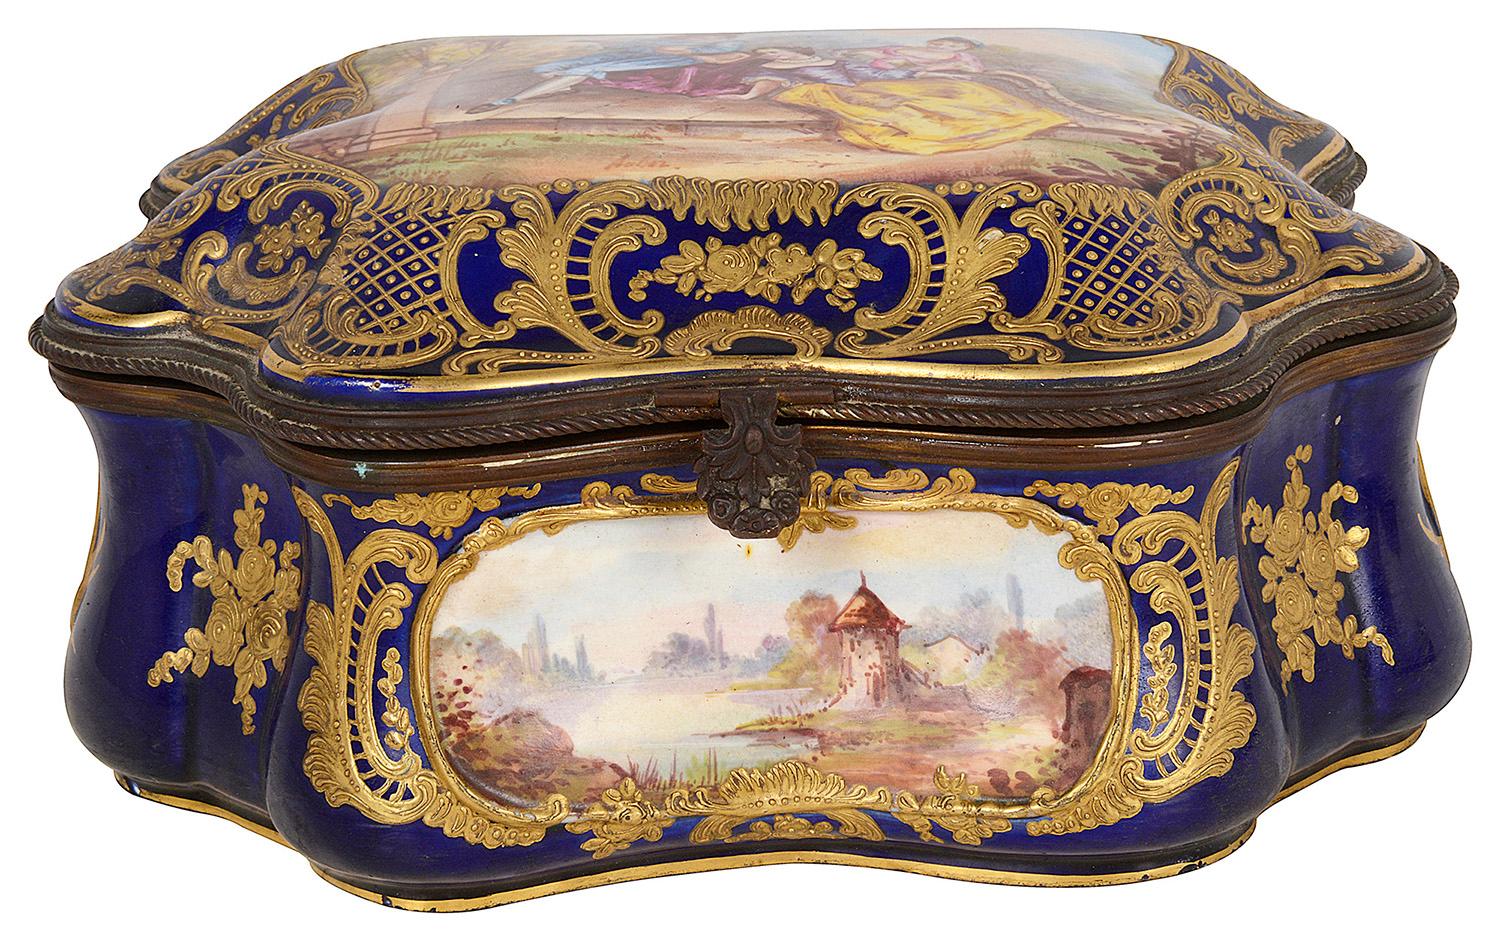 A very good quality late 19th Century French Sevres style porcelain casket, having a Cobalt blue ground, scrolling and floral gilded decoration, inset hand painted lakeland scenes, a romantic scene to the lid of a musician serenading a young lady